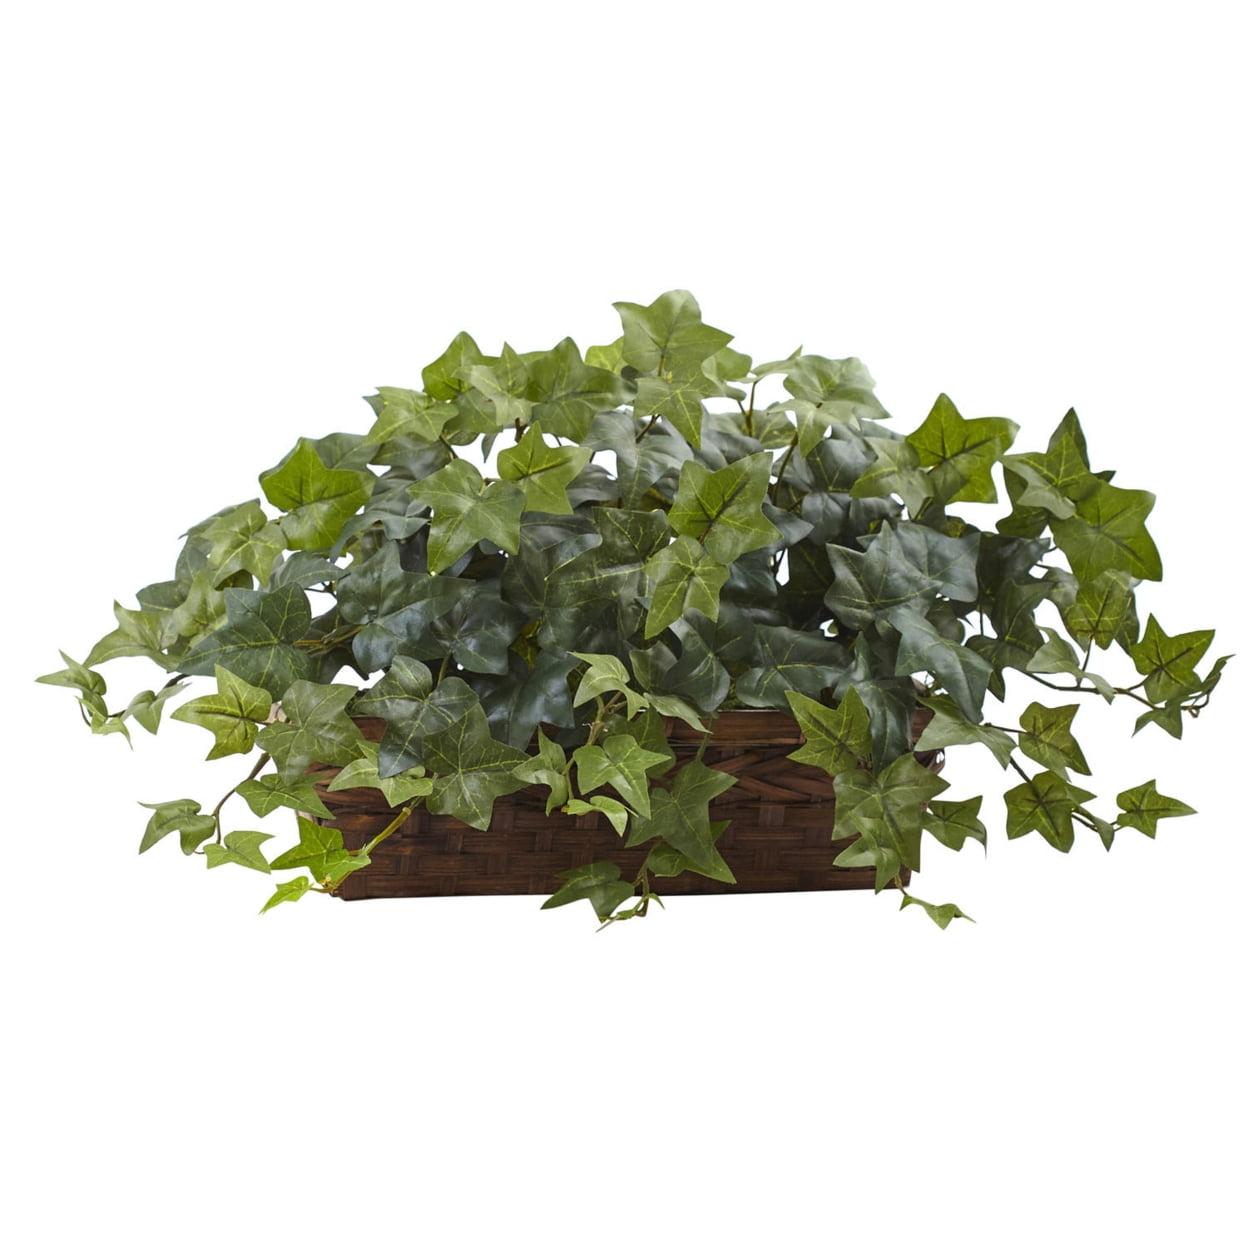 Lush Green Ivy 30" Tabletop Potted Plant in Brown Basket